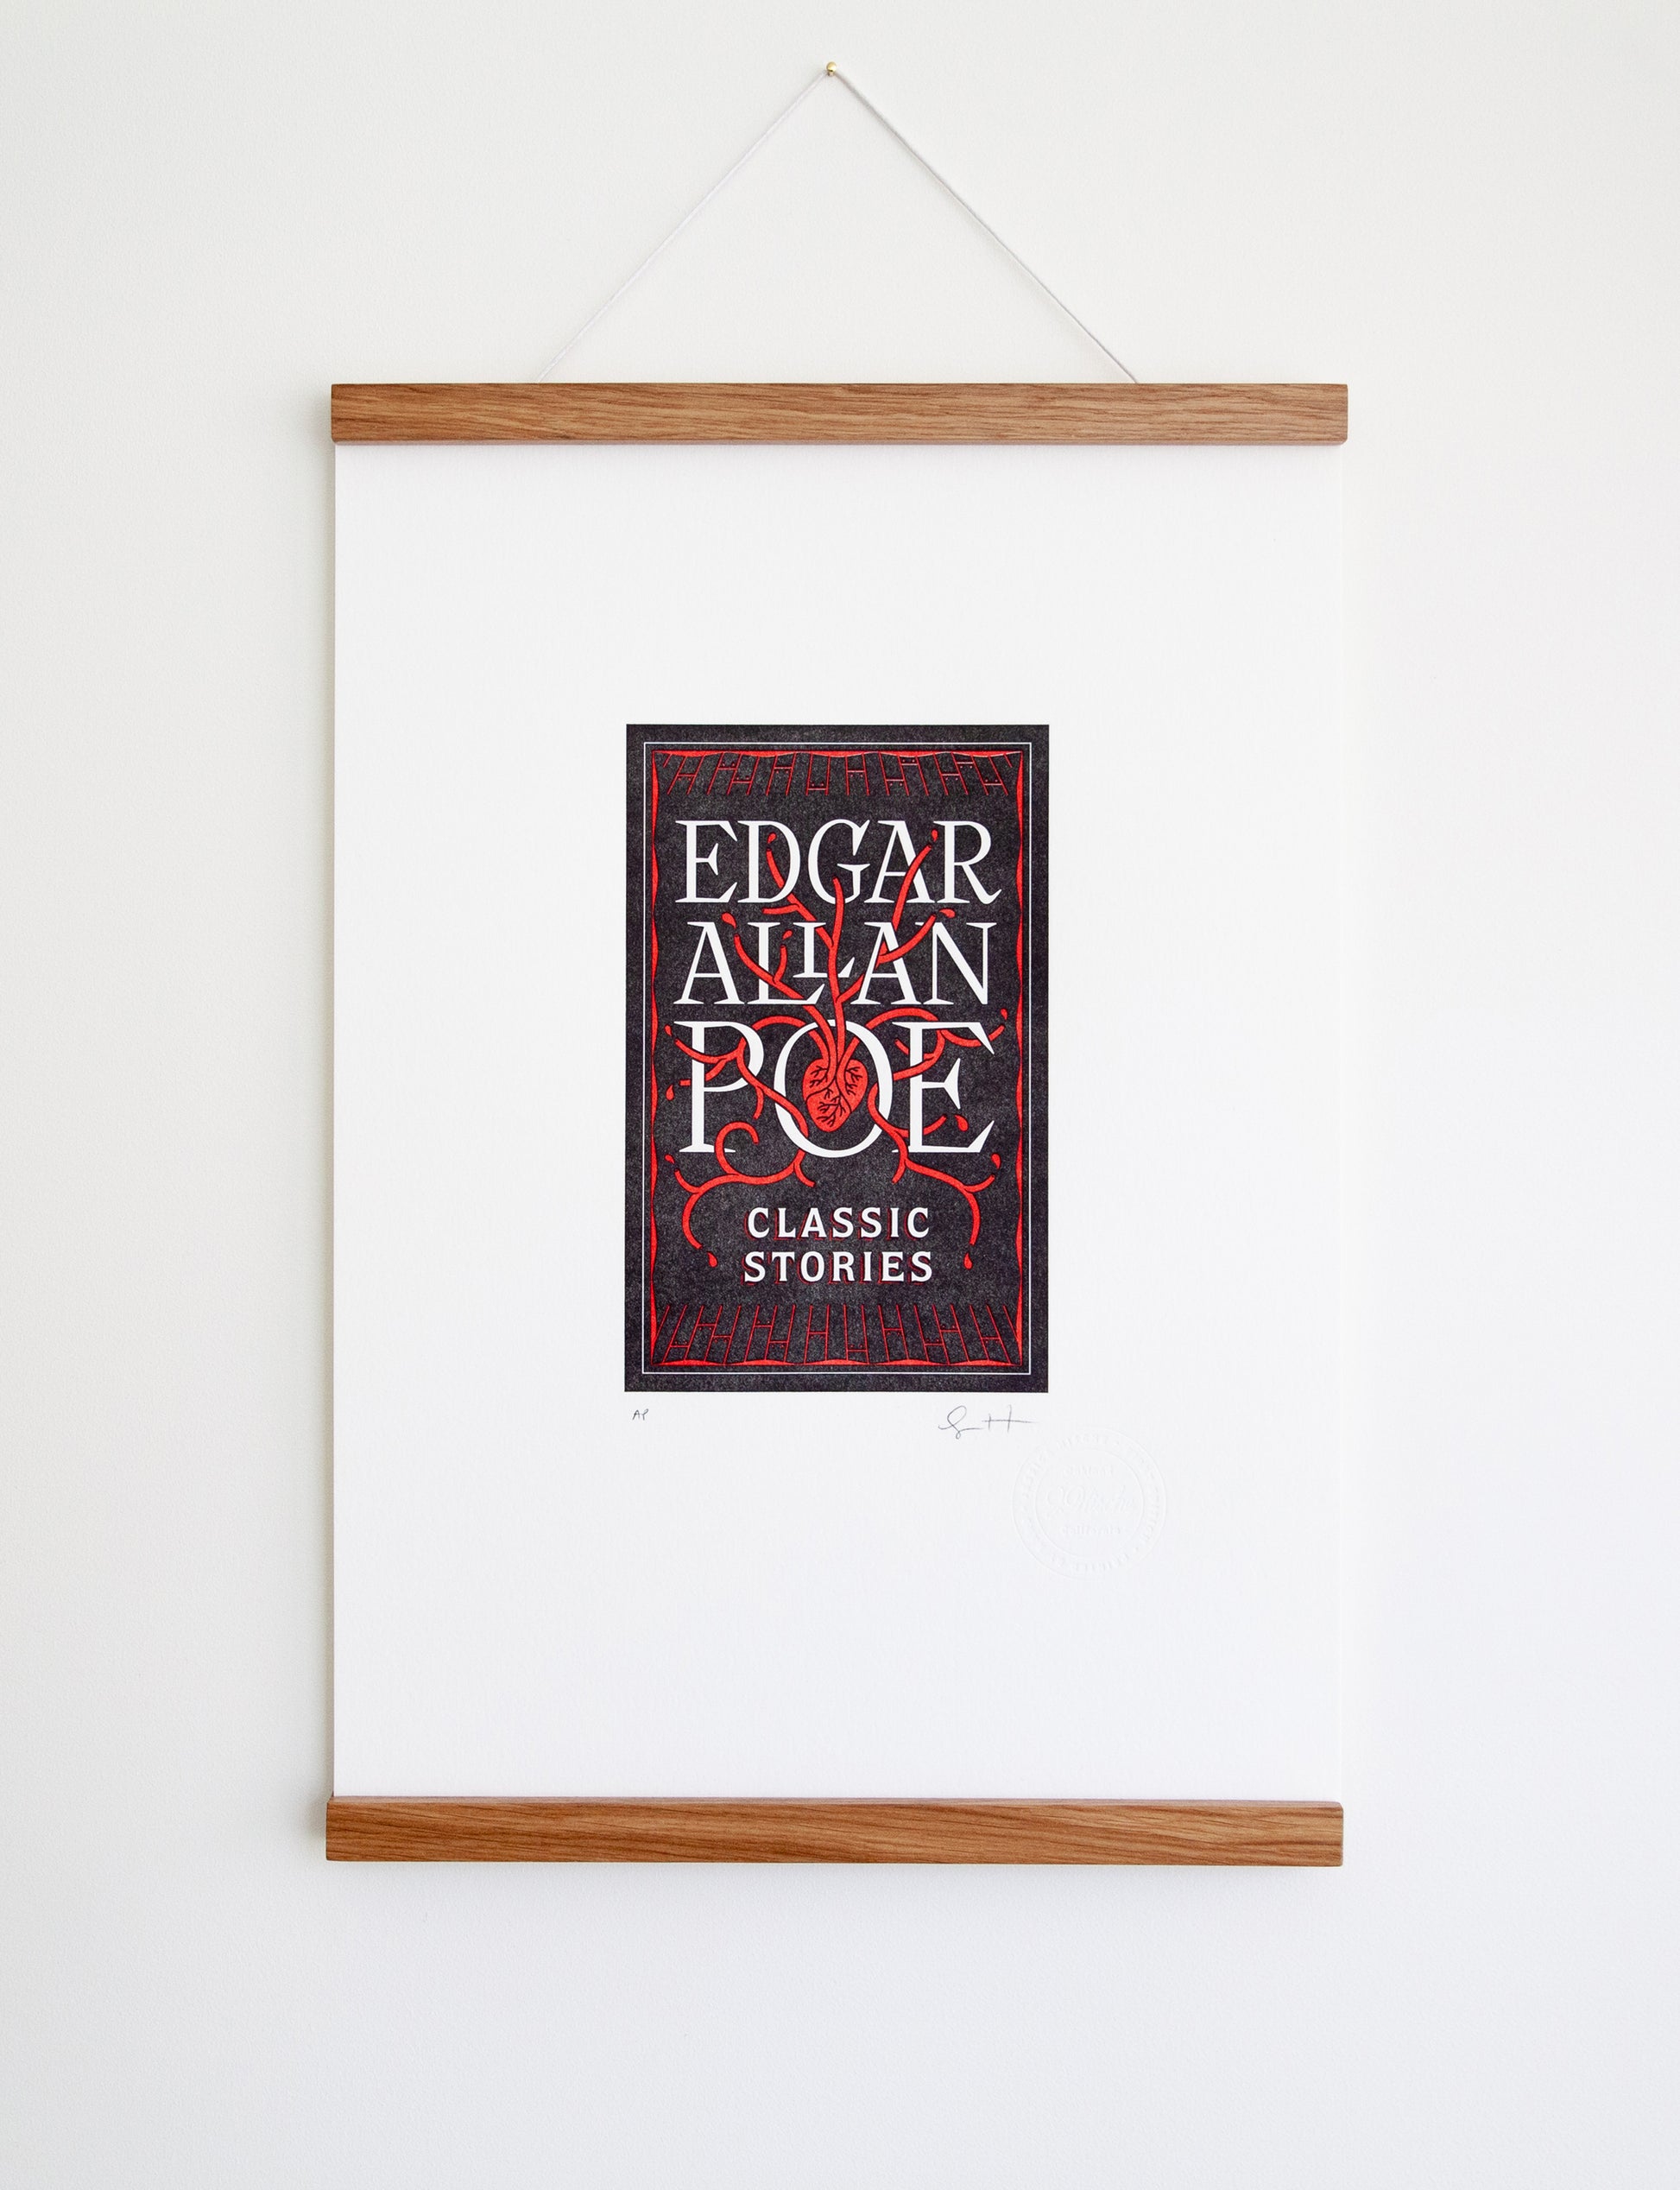 Framed 2-color letterpress print in black and red. Printed artwork is an illustrated book cover of Edgar Allan Poe including custom hand lettering.